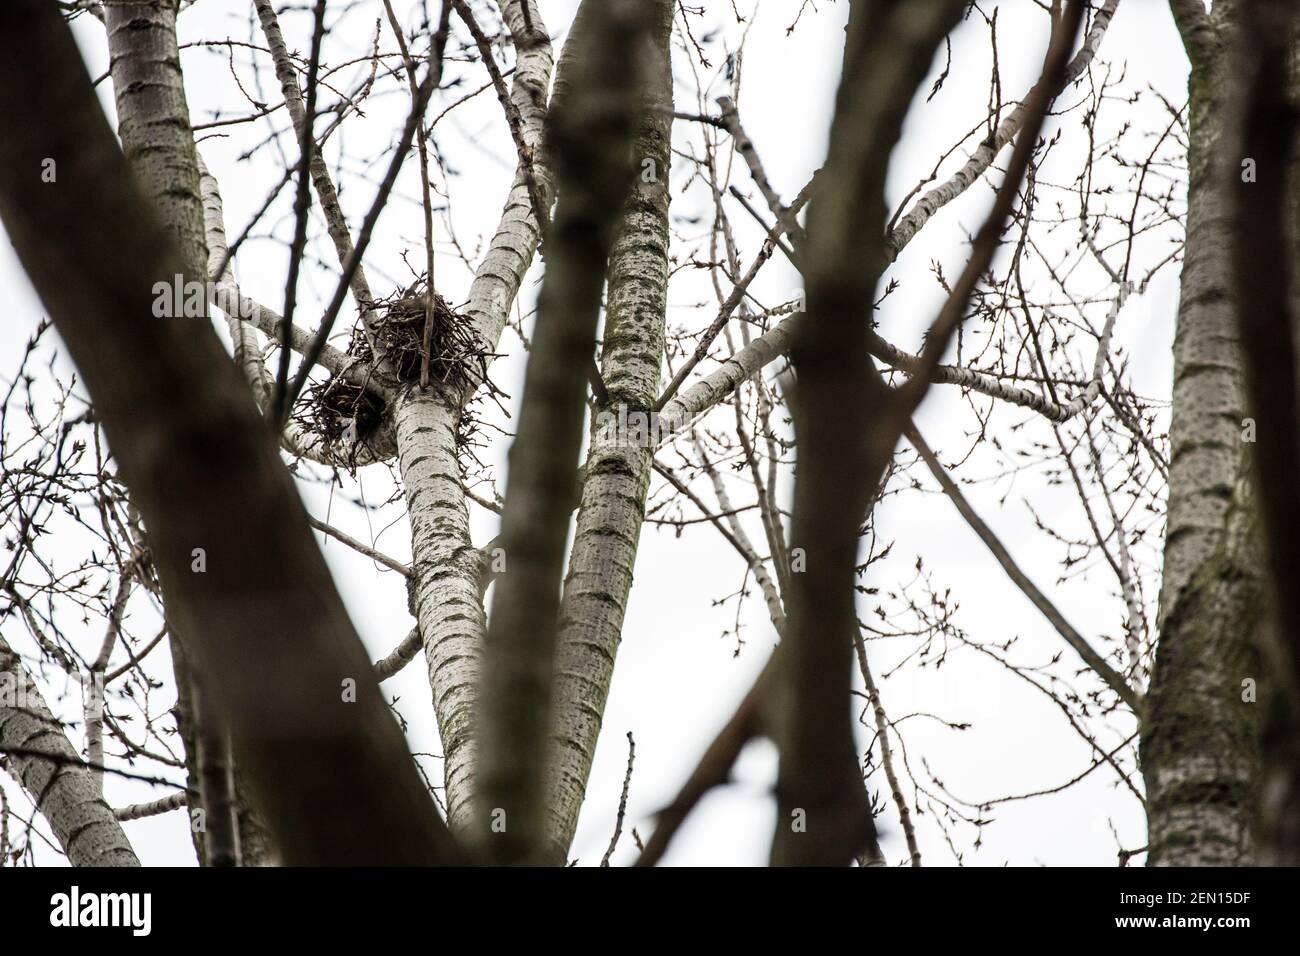 Wandsworth, London, UK, 22 February 2021. Wandsworth, London, UK; February 22, 2021: A visible bird nest on the brances of the 100-year-old black poplar tree in York Gardens, Battersea. During the night, three activists have climbed the tree, in order to save it from felling. The tree was due for cutting down to make way for a new electric cable, part of the local housing regeneration scheme. The poplar tree, a Category A, high amenity value tree, can only be felled if there are compelling reasons to cut it down. Usually the presence of active bird nests can stop or delay tree fellings. Stock Photo